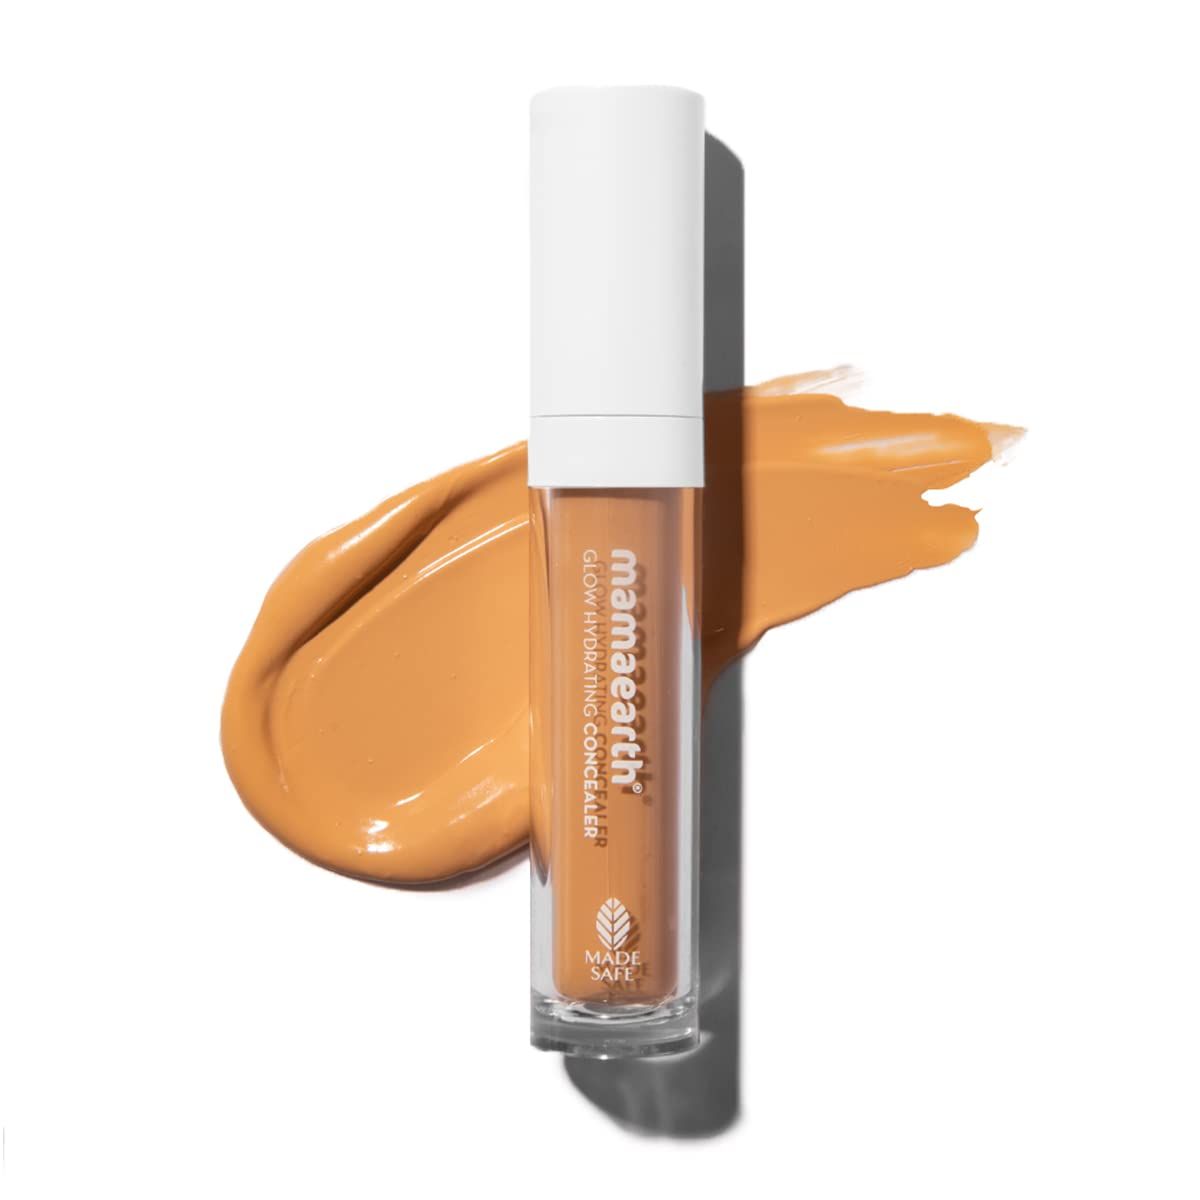 Mamaearth Glow Hydrating Concealer Nude Glow - 6 ml